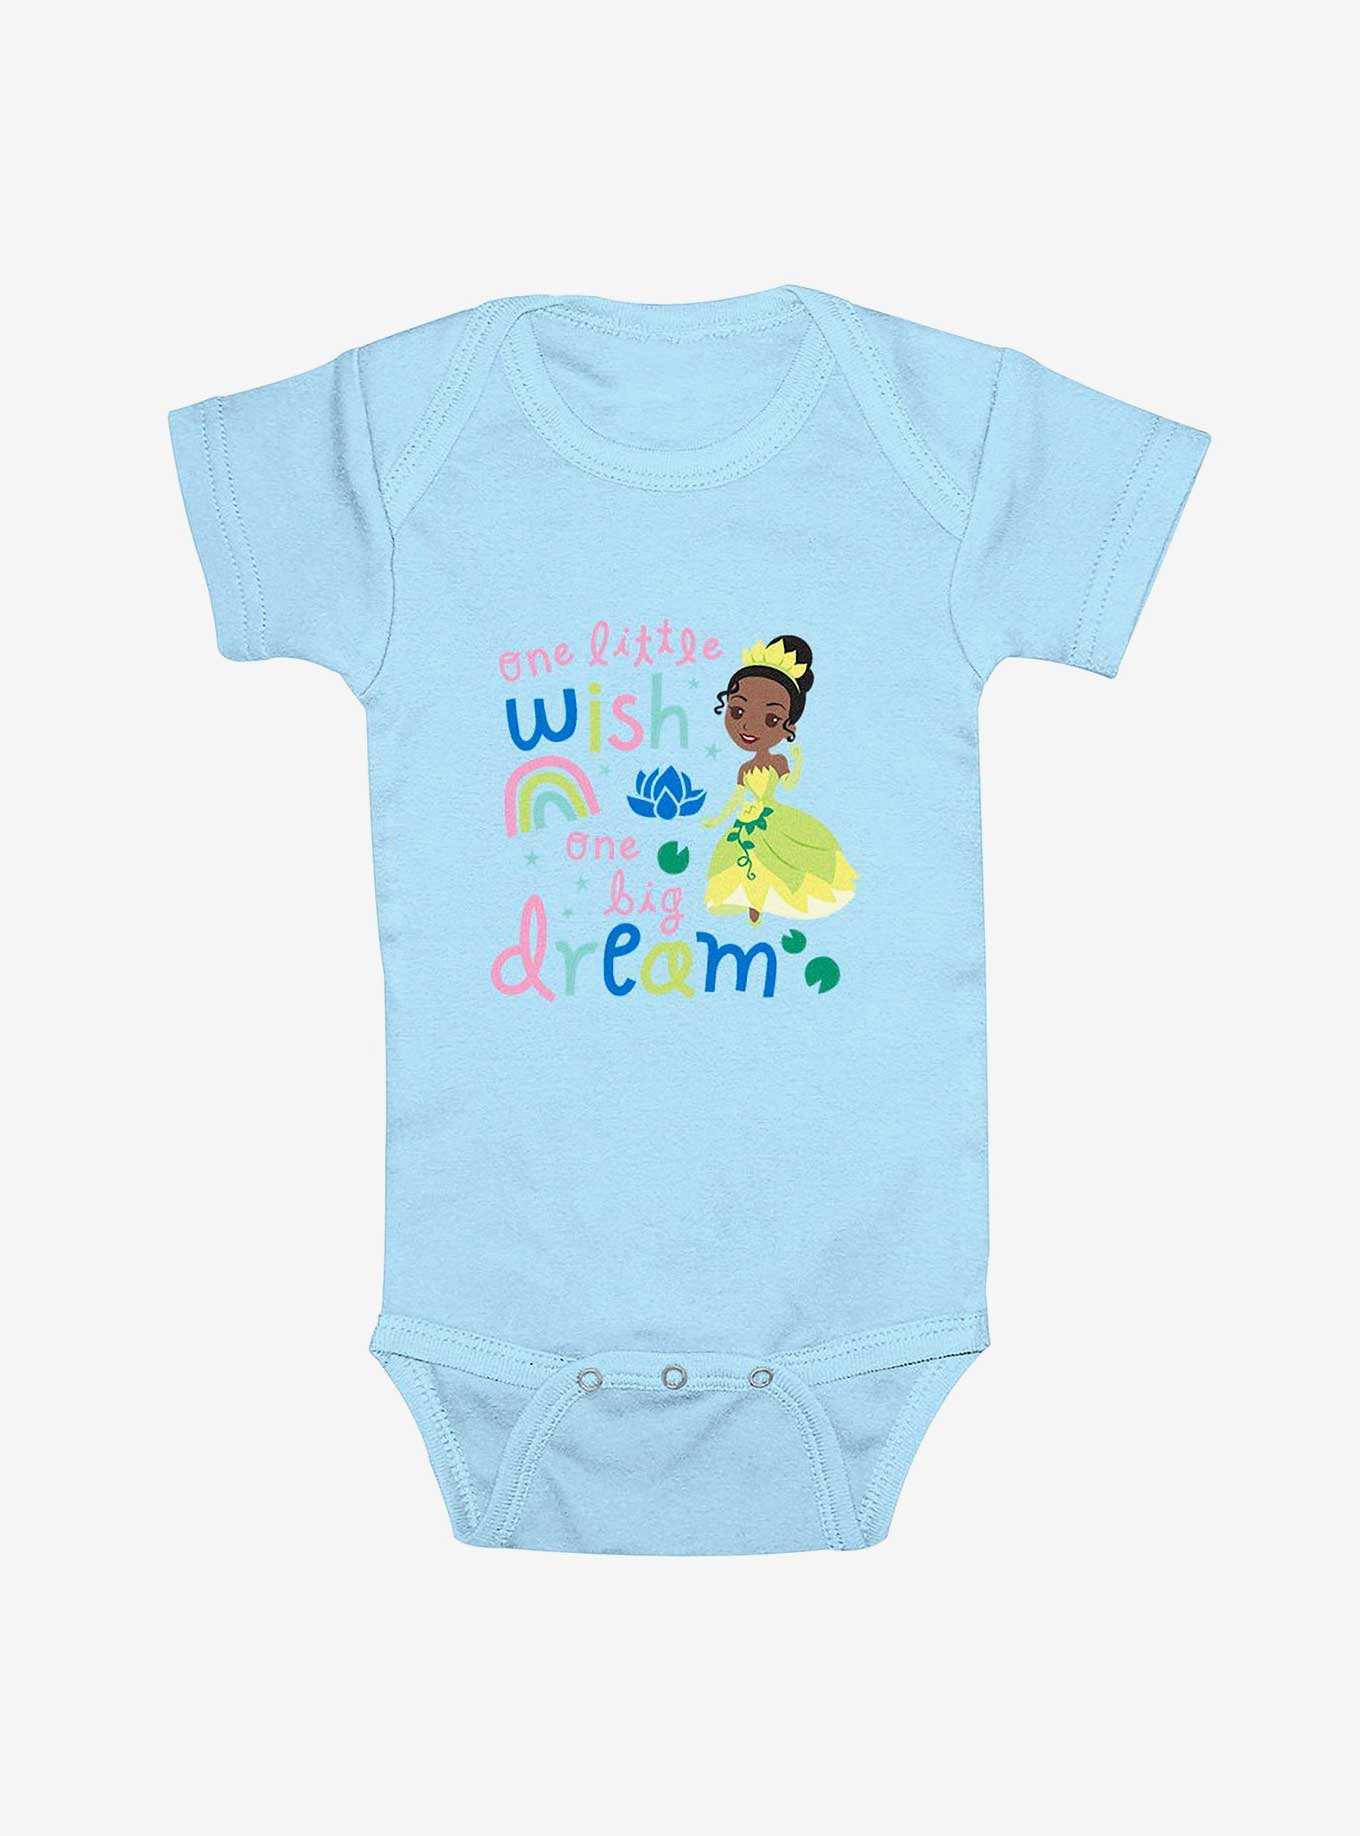 Disney The Princess and the Frog Tiana One Big Dream Infant Bodysuit, , hi-res